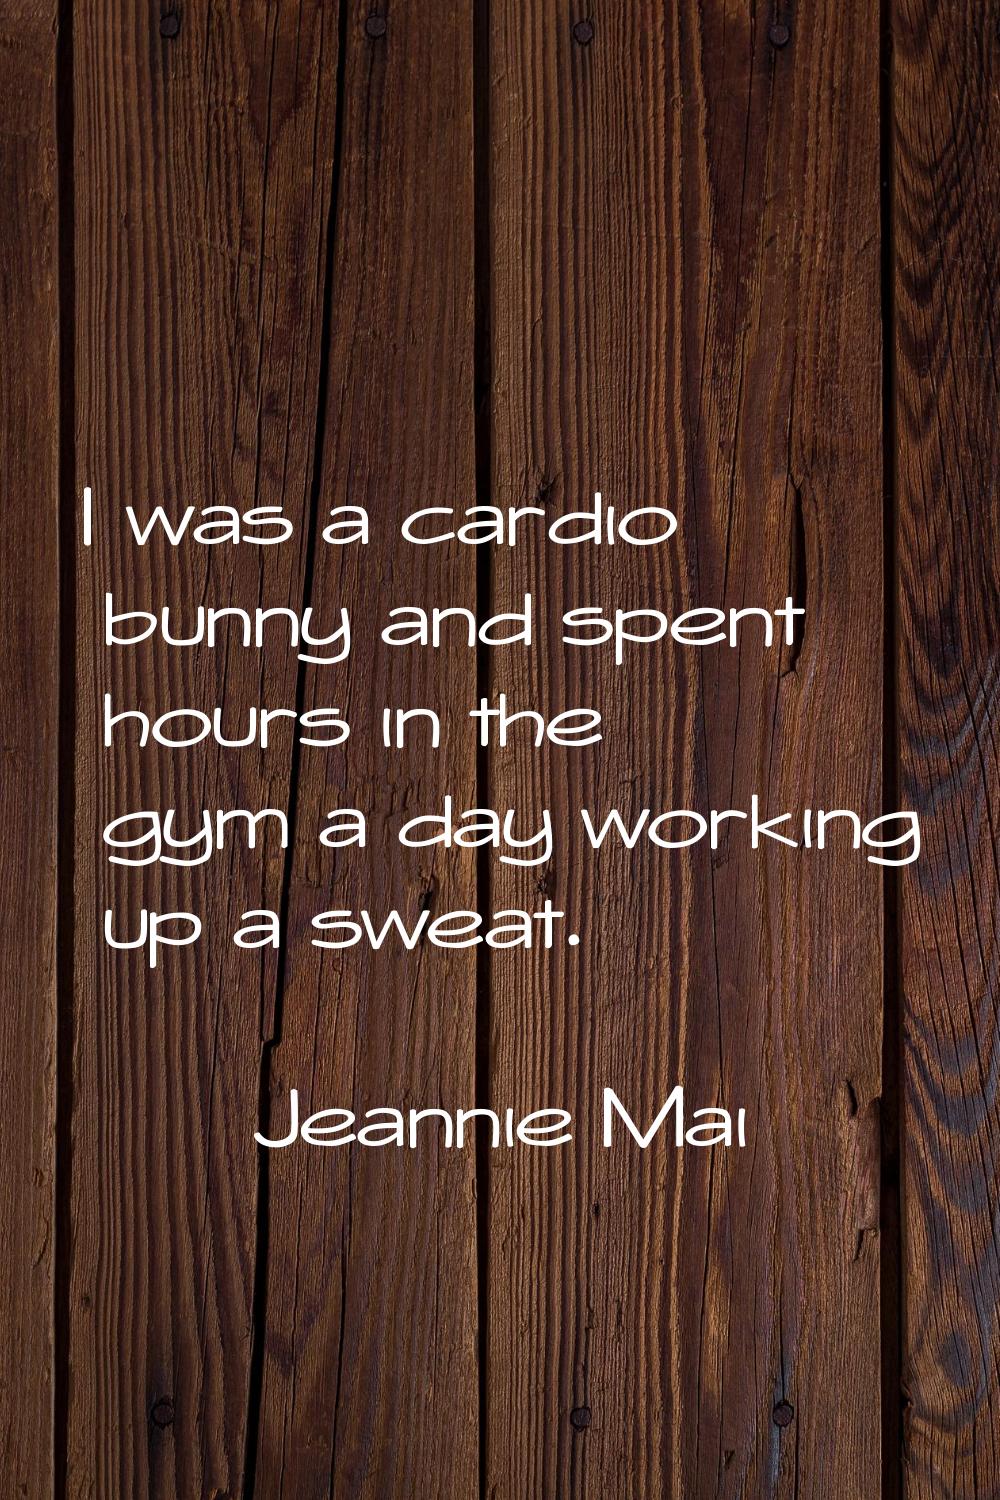 I was a cardio bunny and spent hours in the gym a day working up a sweat.